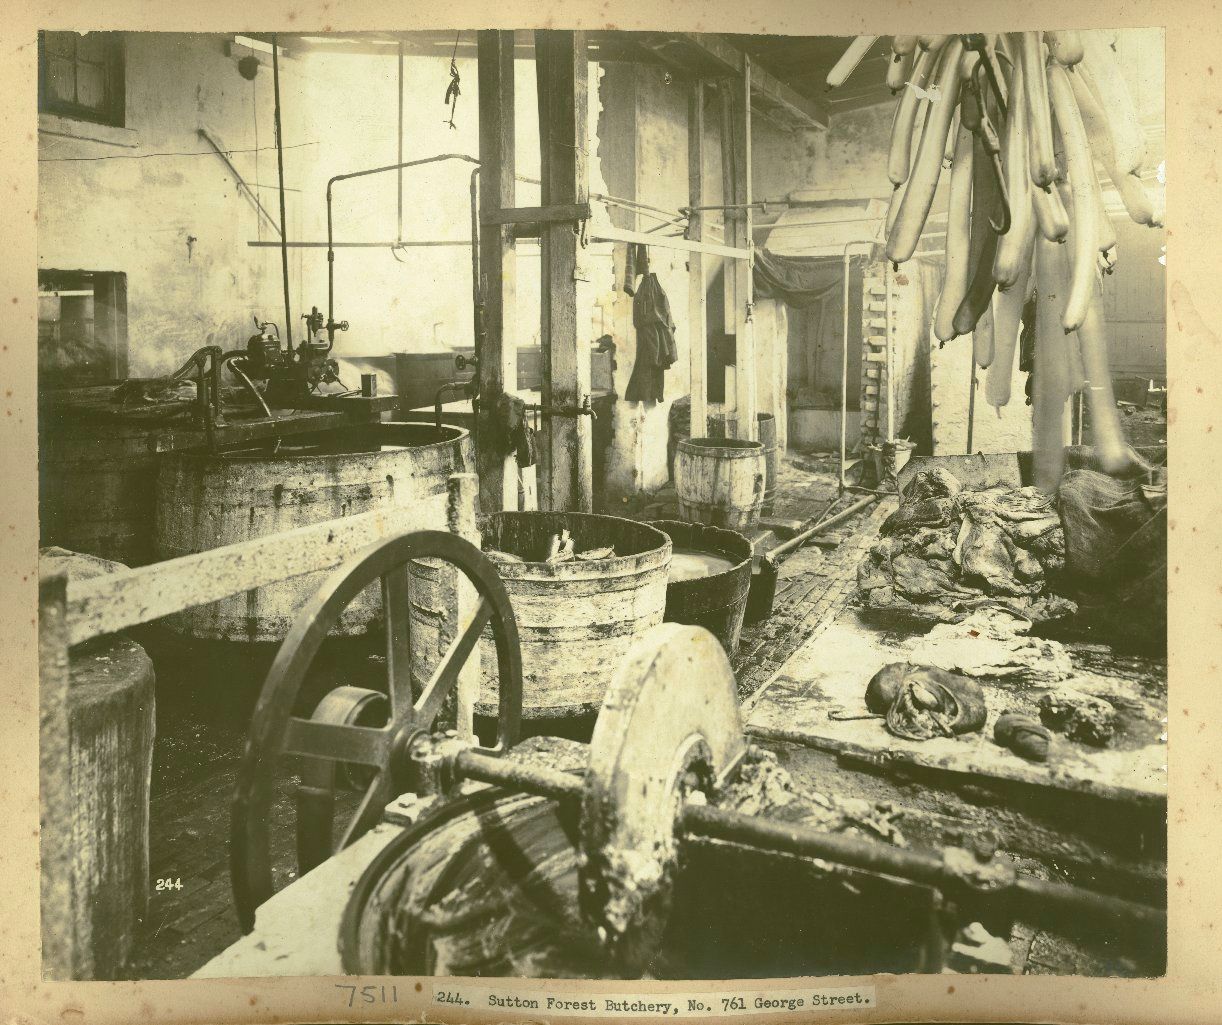 A kitchen in a butchery showing wooden barrels of liquid and sausages hanging above a wooden work bench